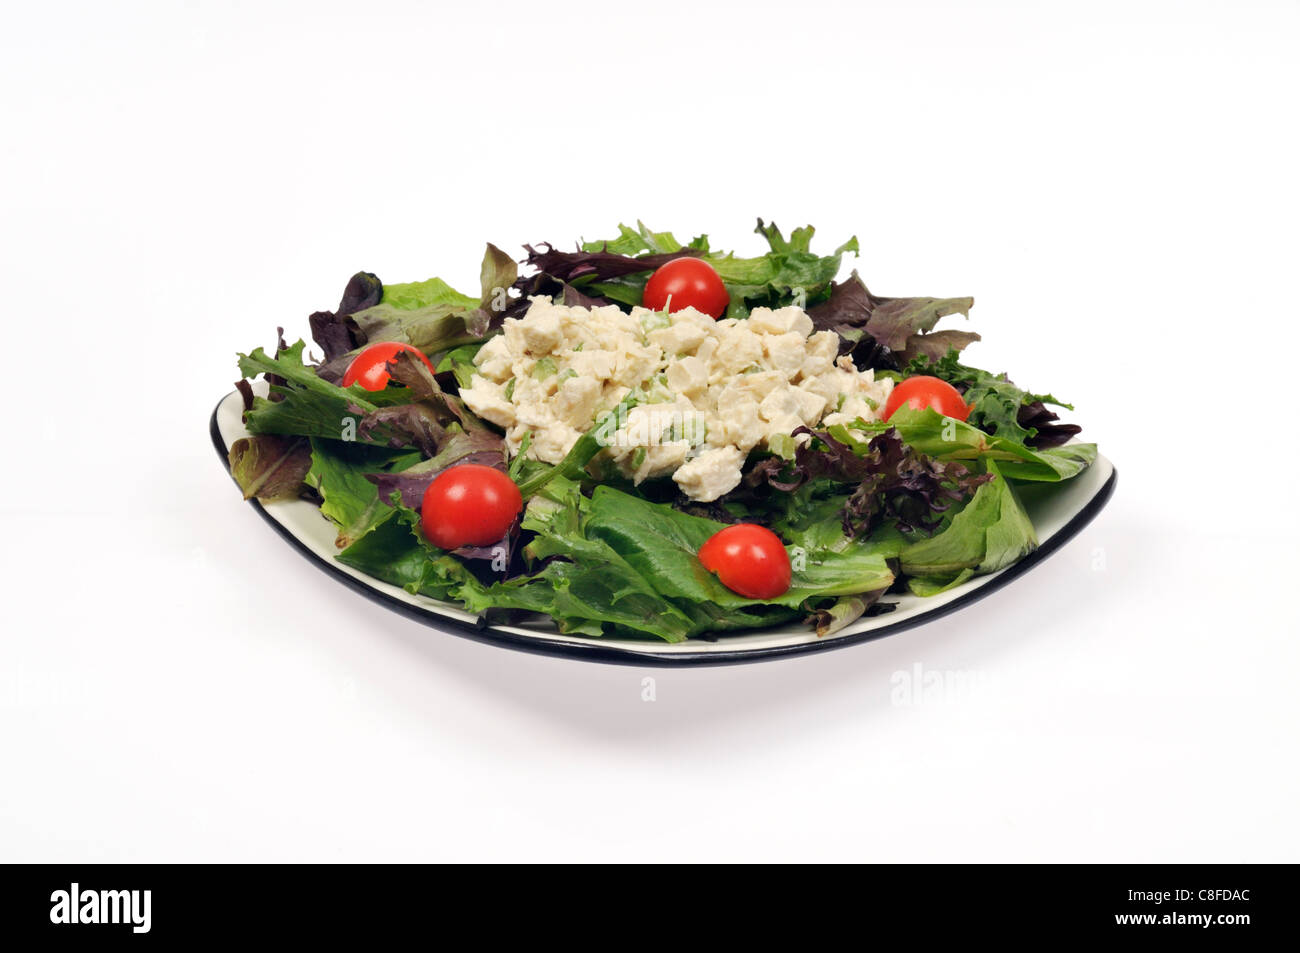 Chicken salad plate with celery, mayo and tomatoes on salad greens on white background cutout. Stock Photo